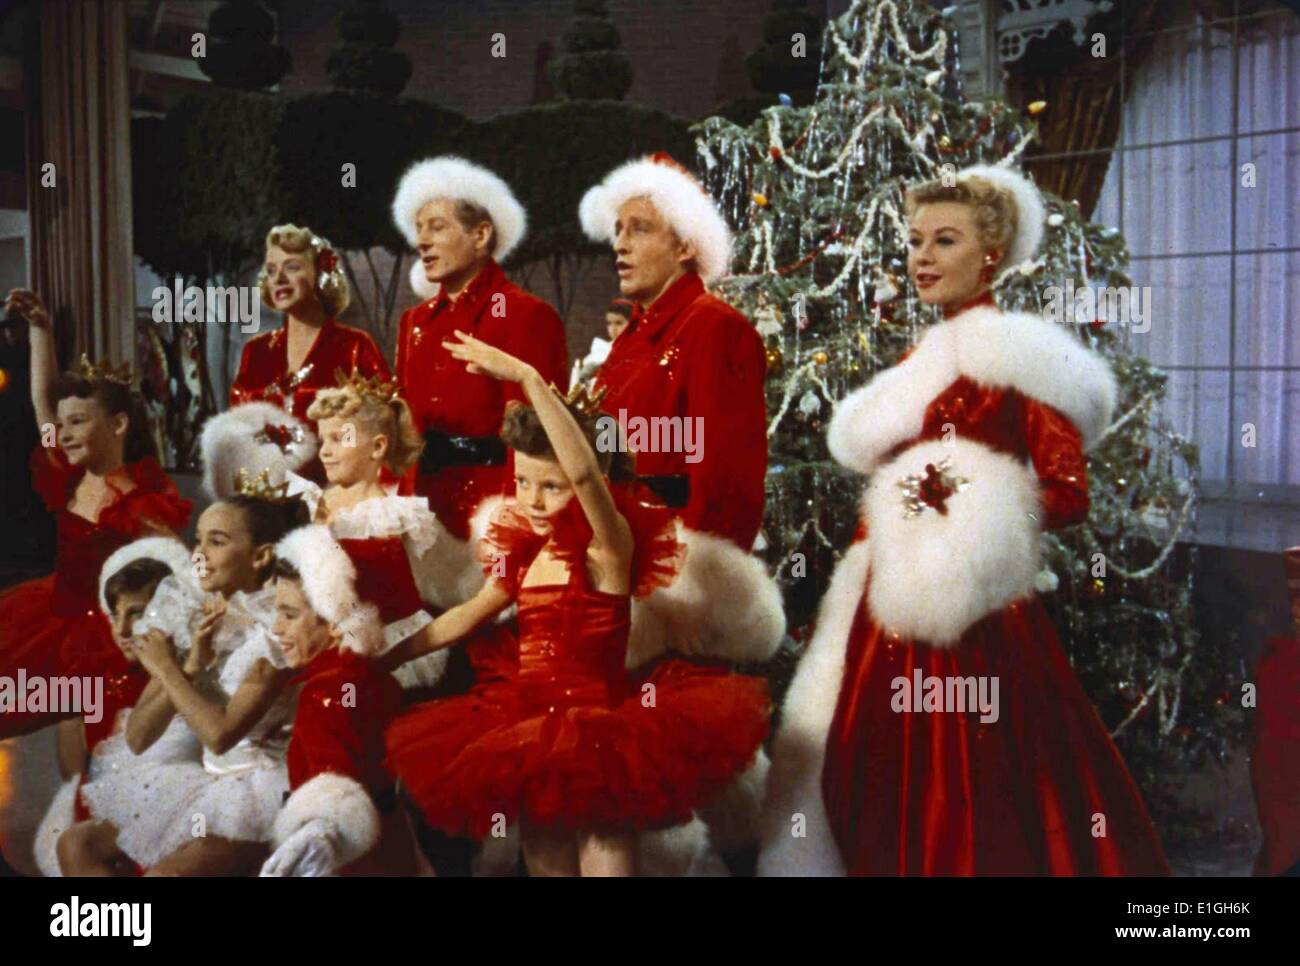 Academy Award for Best Original Song in 1942. for the film, 'White Christmas' The title song is sung by Bing Crosby, Danny Kaye and Rosemary Clooney Stock Photo